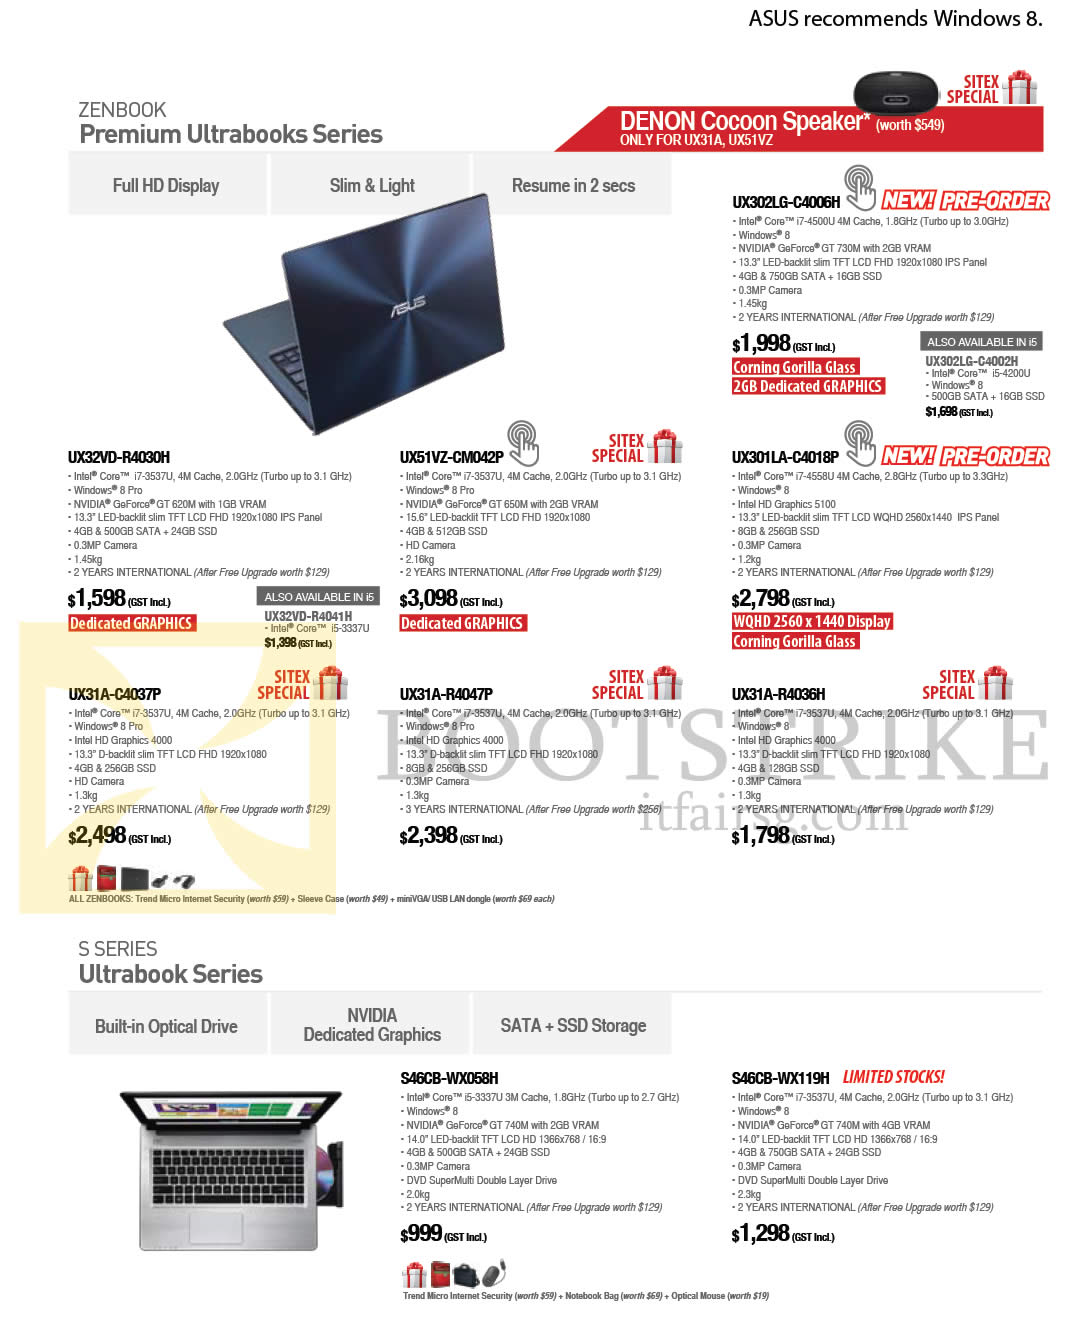 SITEX 2013 price list image brochure of ASUS Notebooks Zenbook Ultrabooks UX32VD-R4030H, UX31A-R4047P, UX-31A-R4036H, S Series SSD S46CB-WX058H, S46CB-WX119H